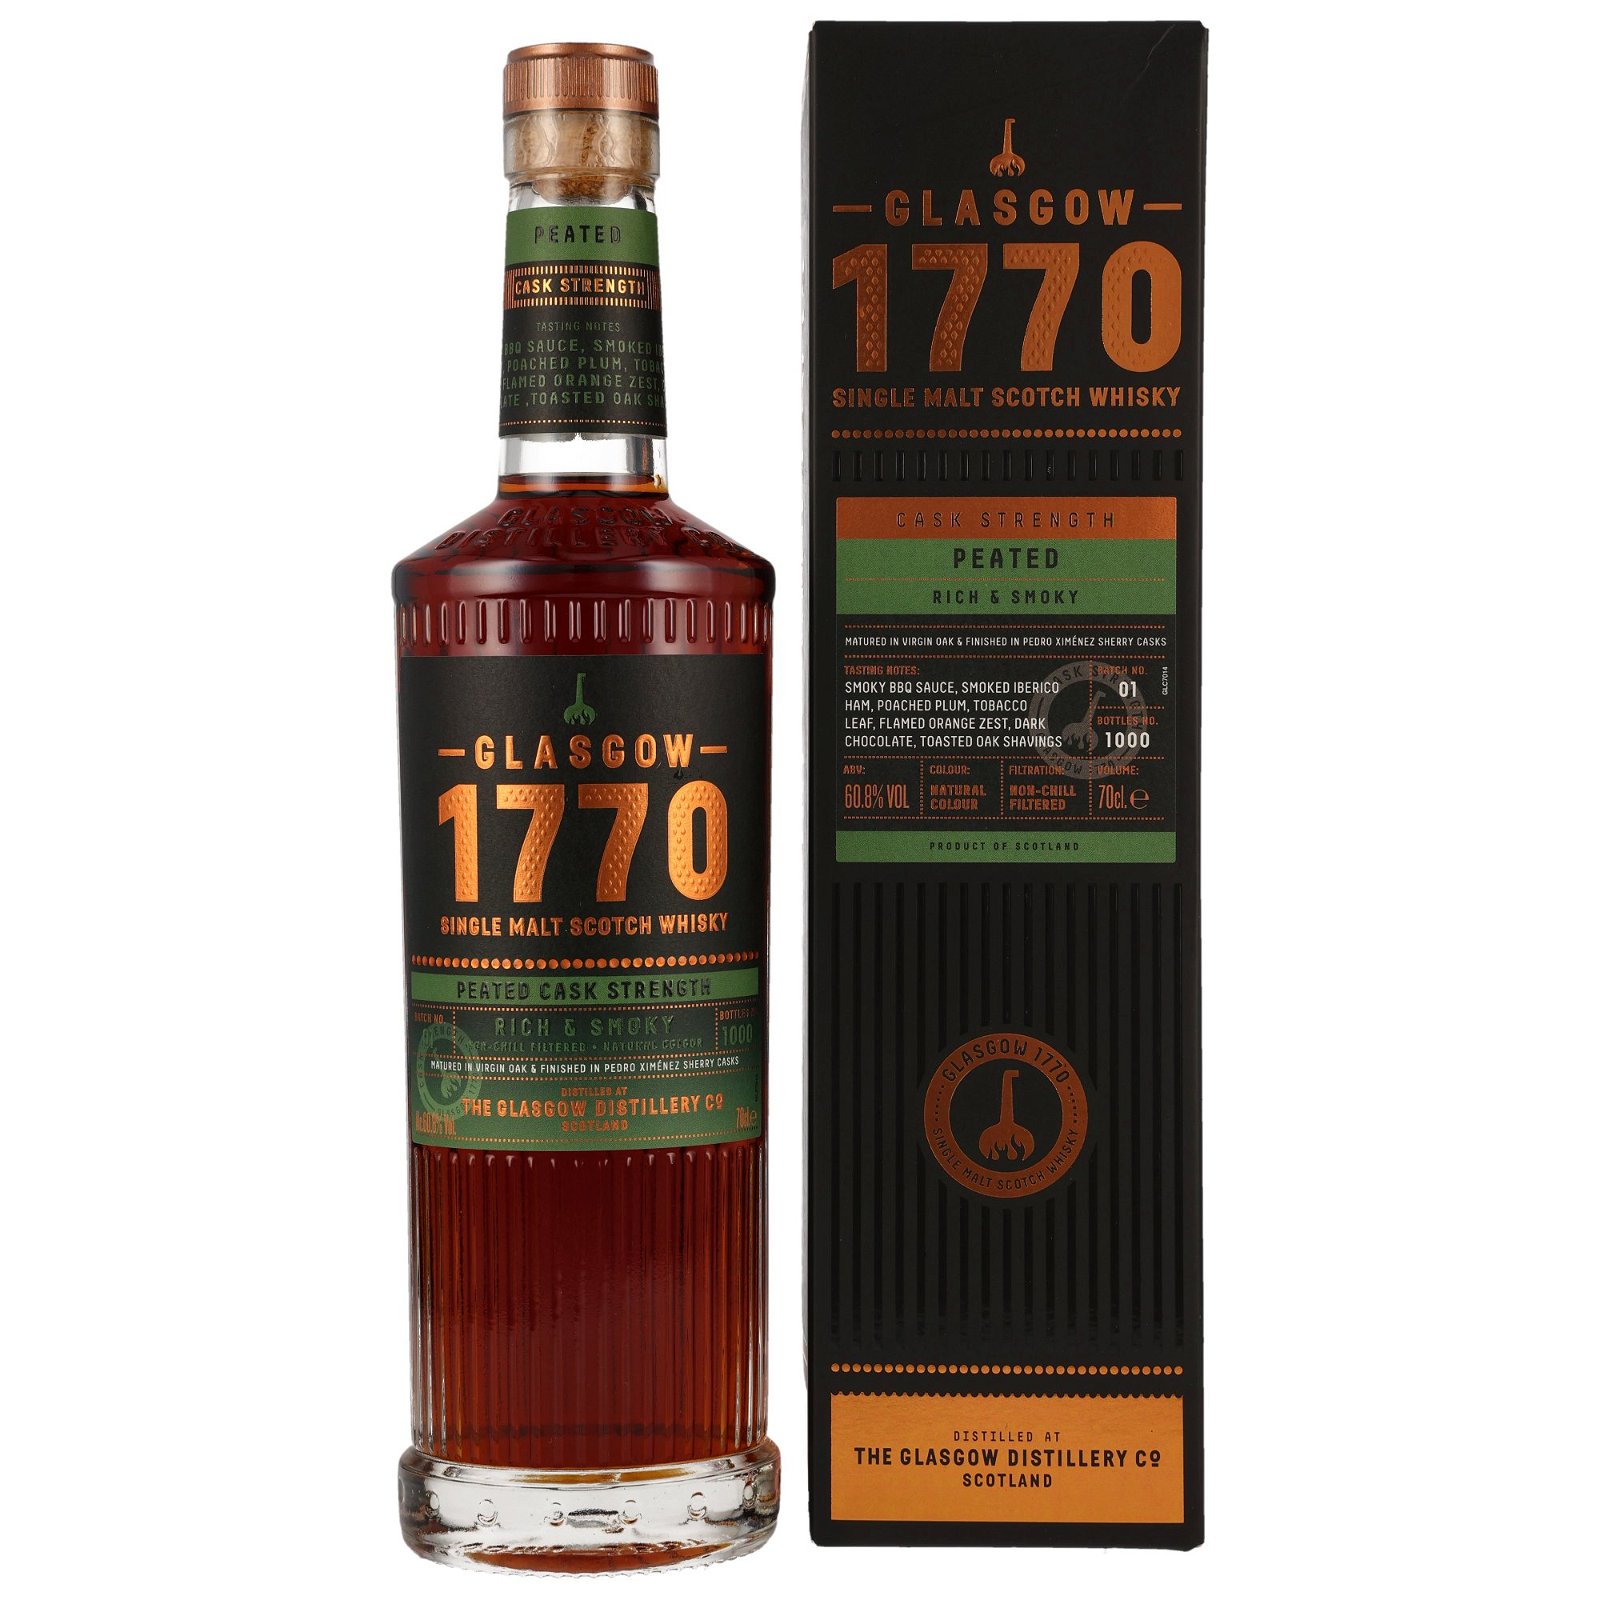 1770 Glasgow Peated Cask Strength PX Cask Finish